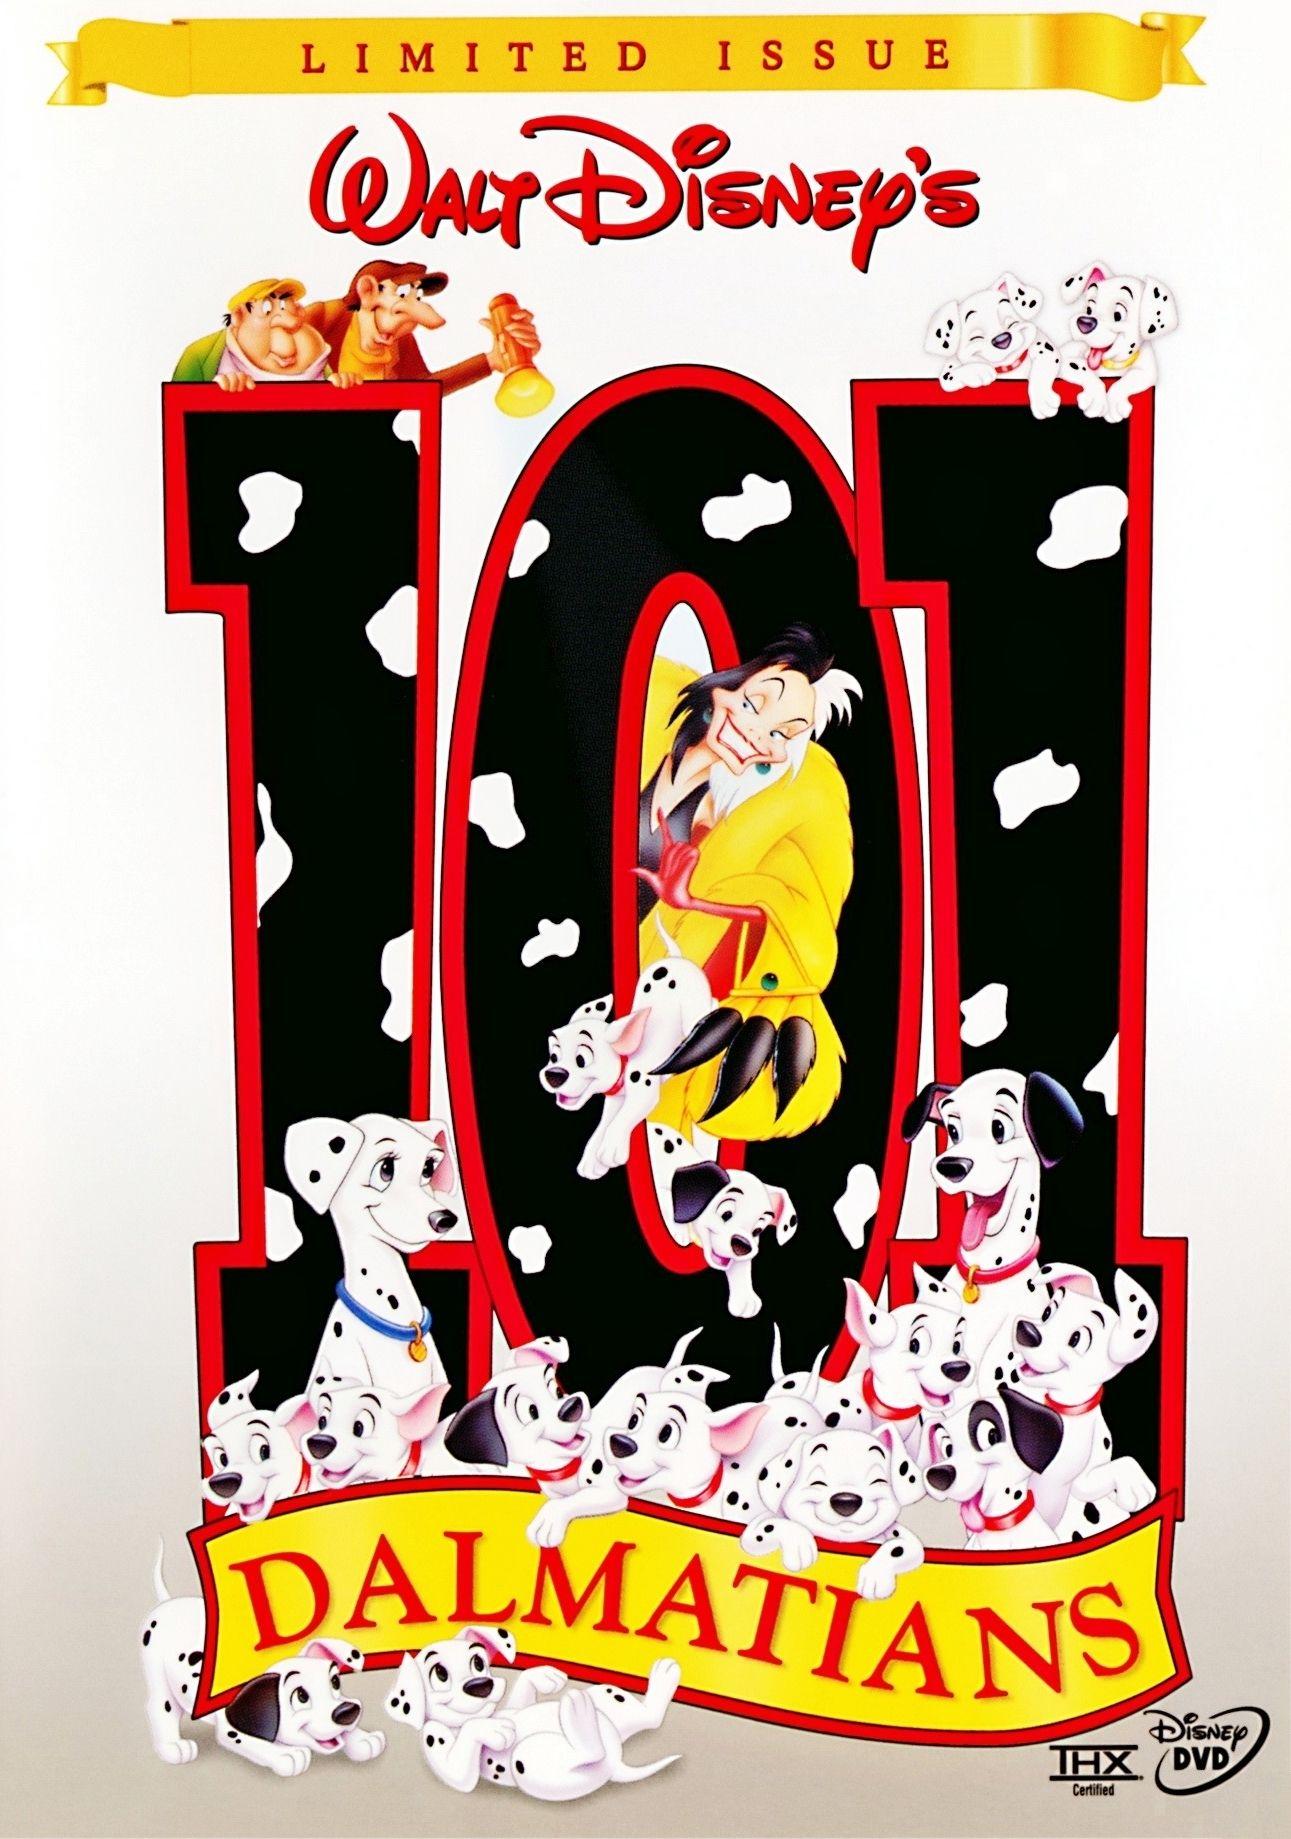 Opening to 101 Dalmatians 1999 VHS (Limited Issue). Scratchpad